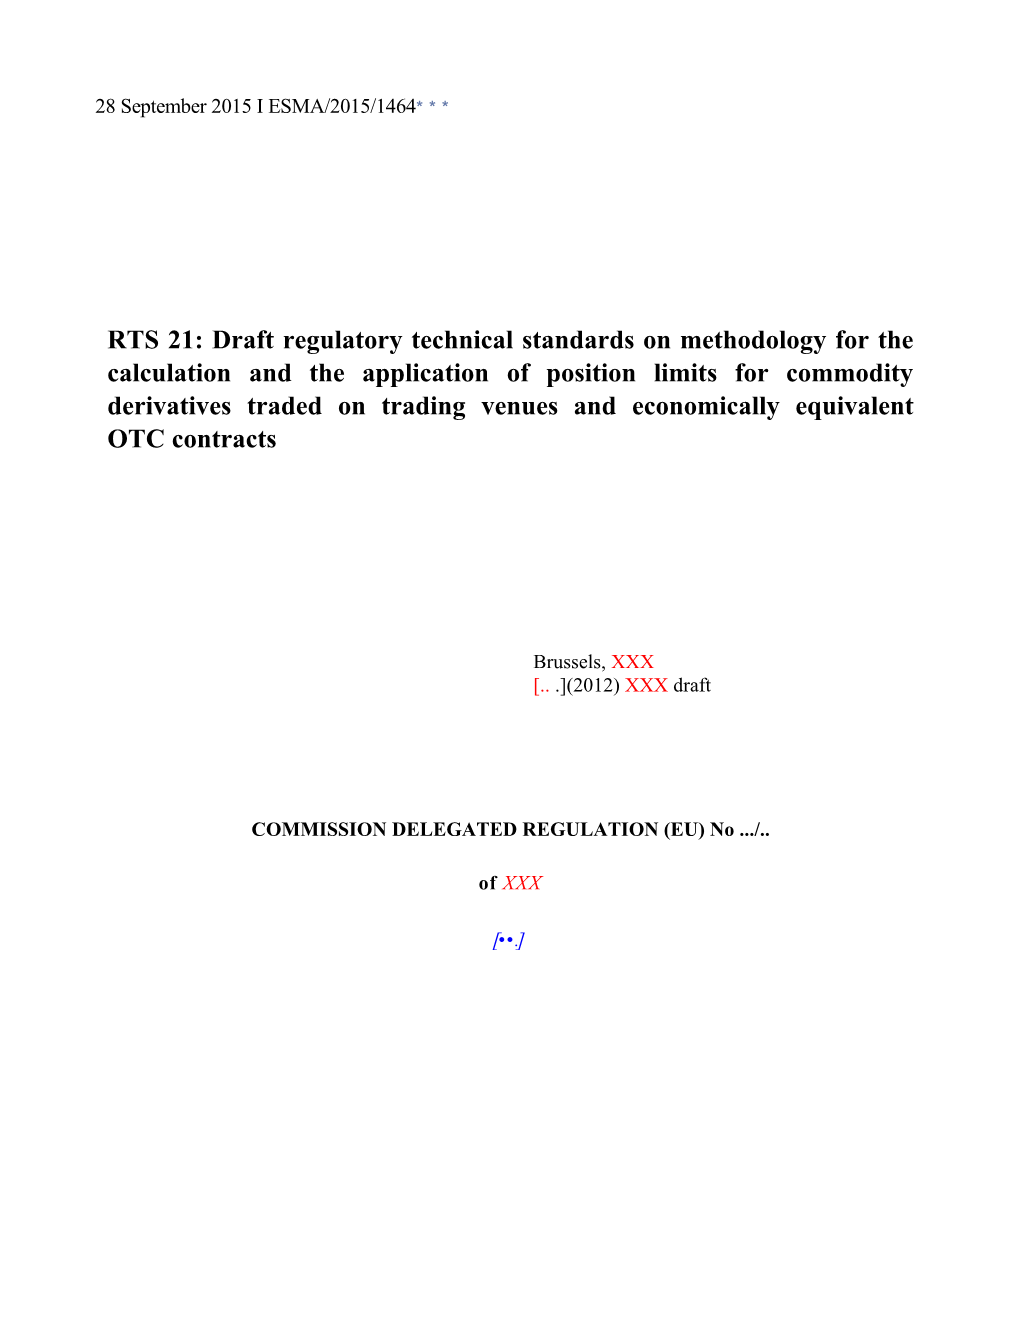 RTS 21: Draft Regulatory Technical Standards on Methodology for the Calculation and The